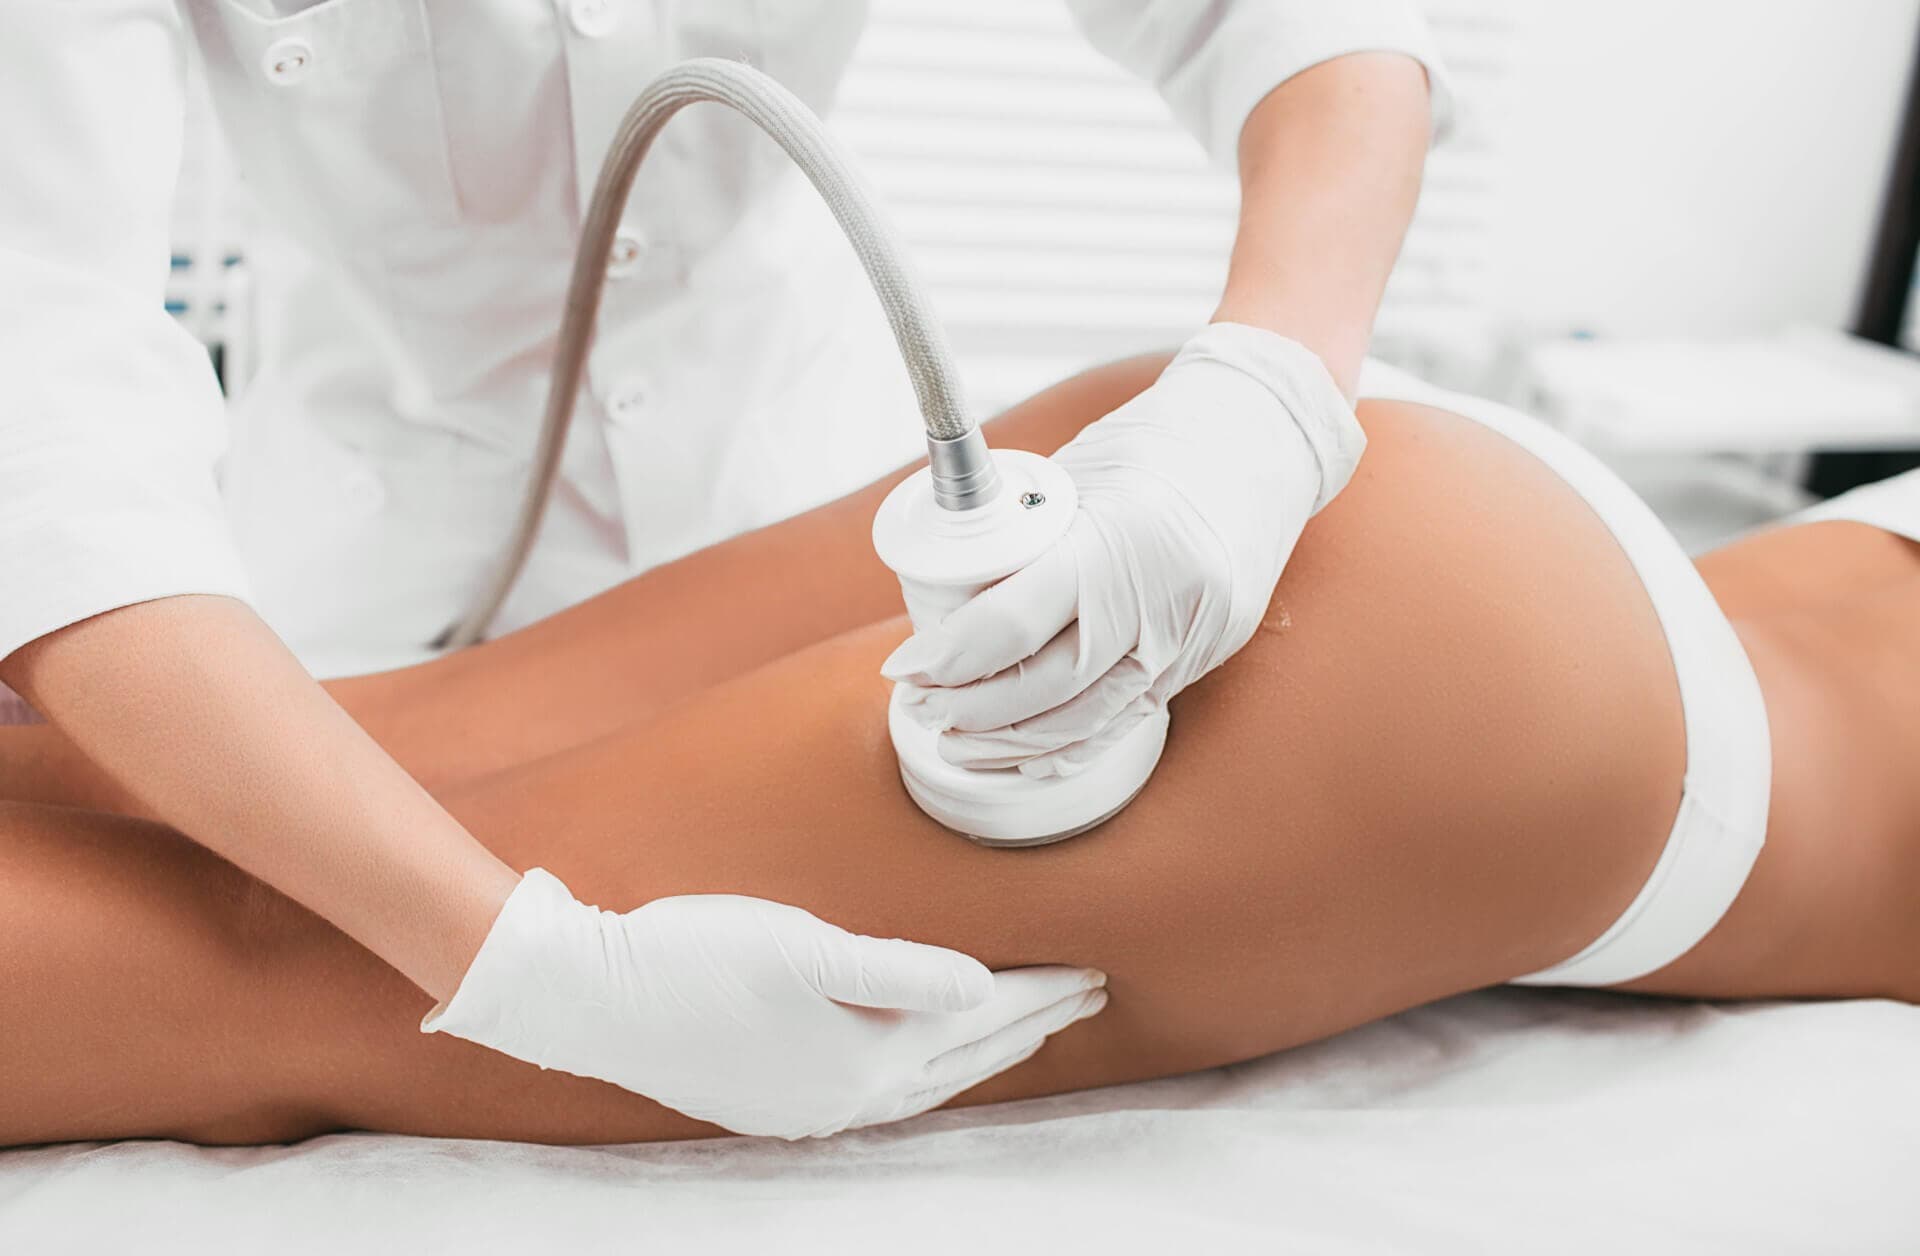 Ultrasonic Liposuction Pros and Cons